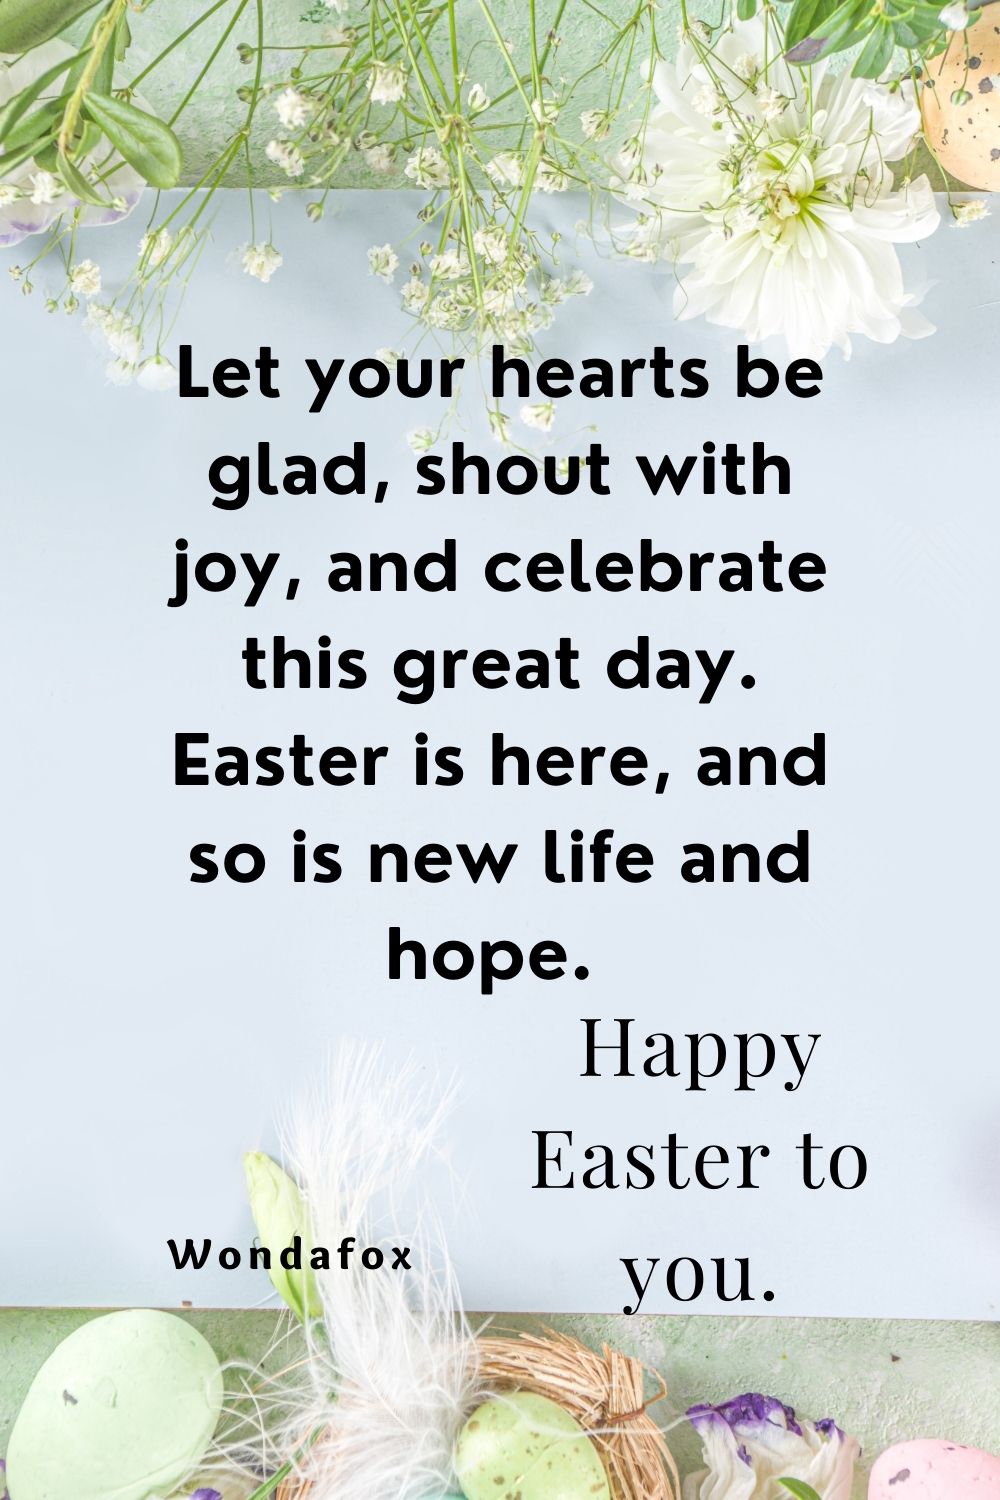 Let your hearts be glad, shout with joy, and celebrate this great day. Easter is here, and so is new life and hope. Happy Easter to you.